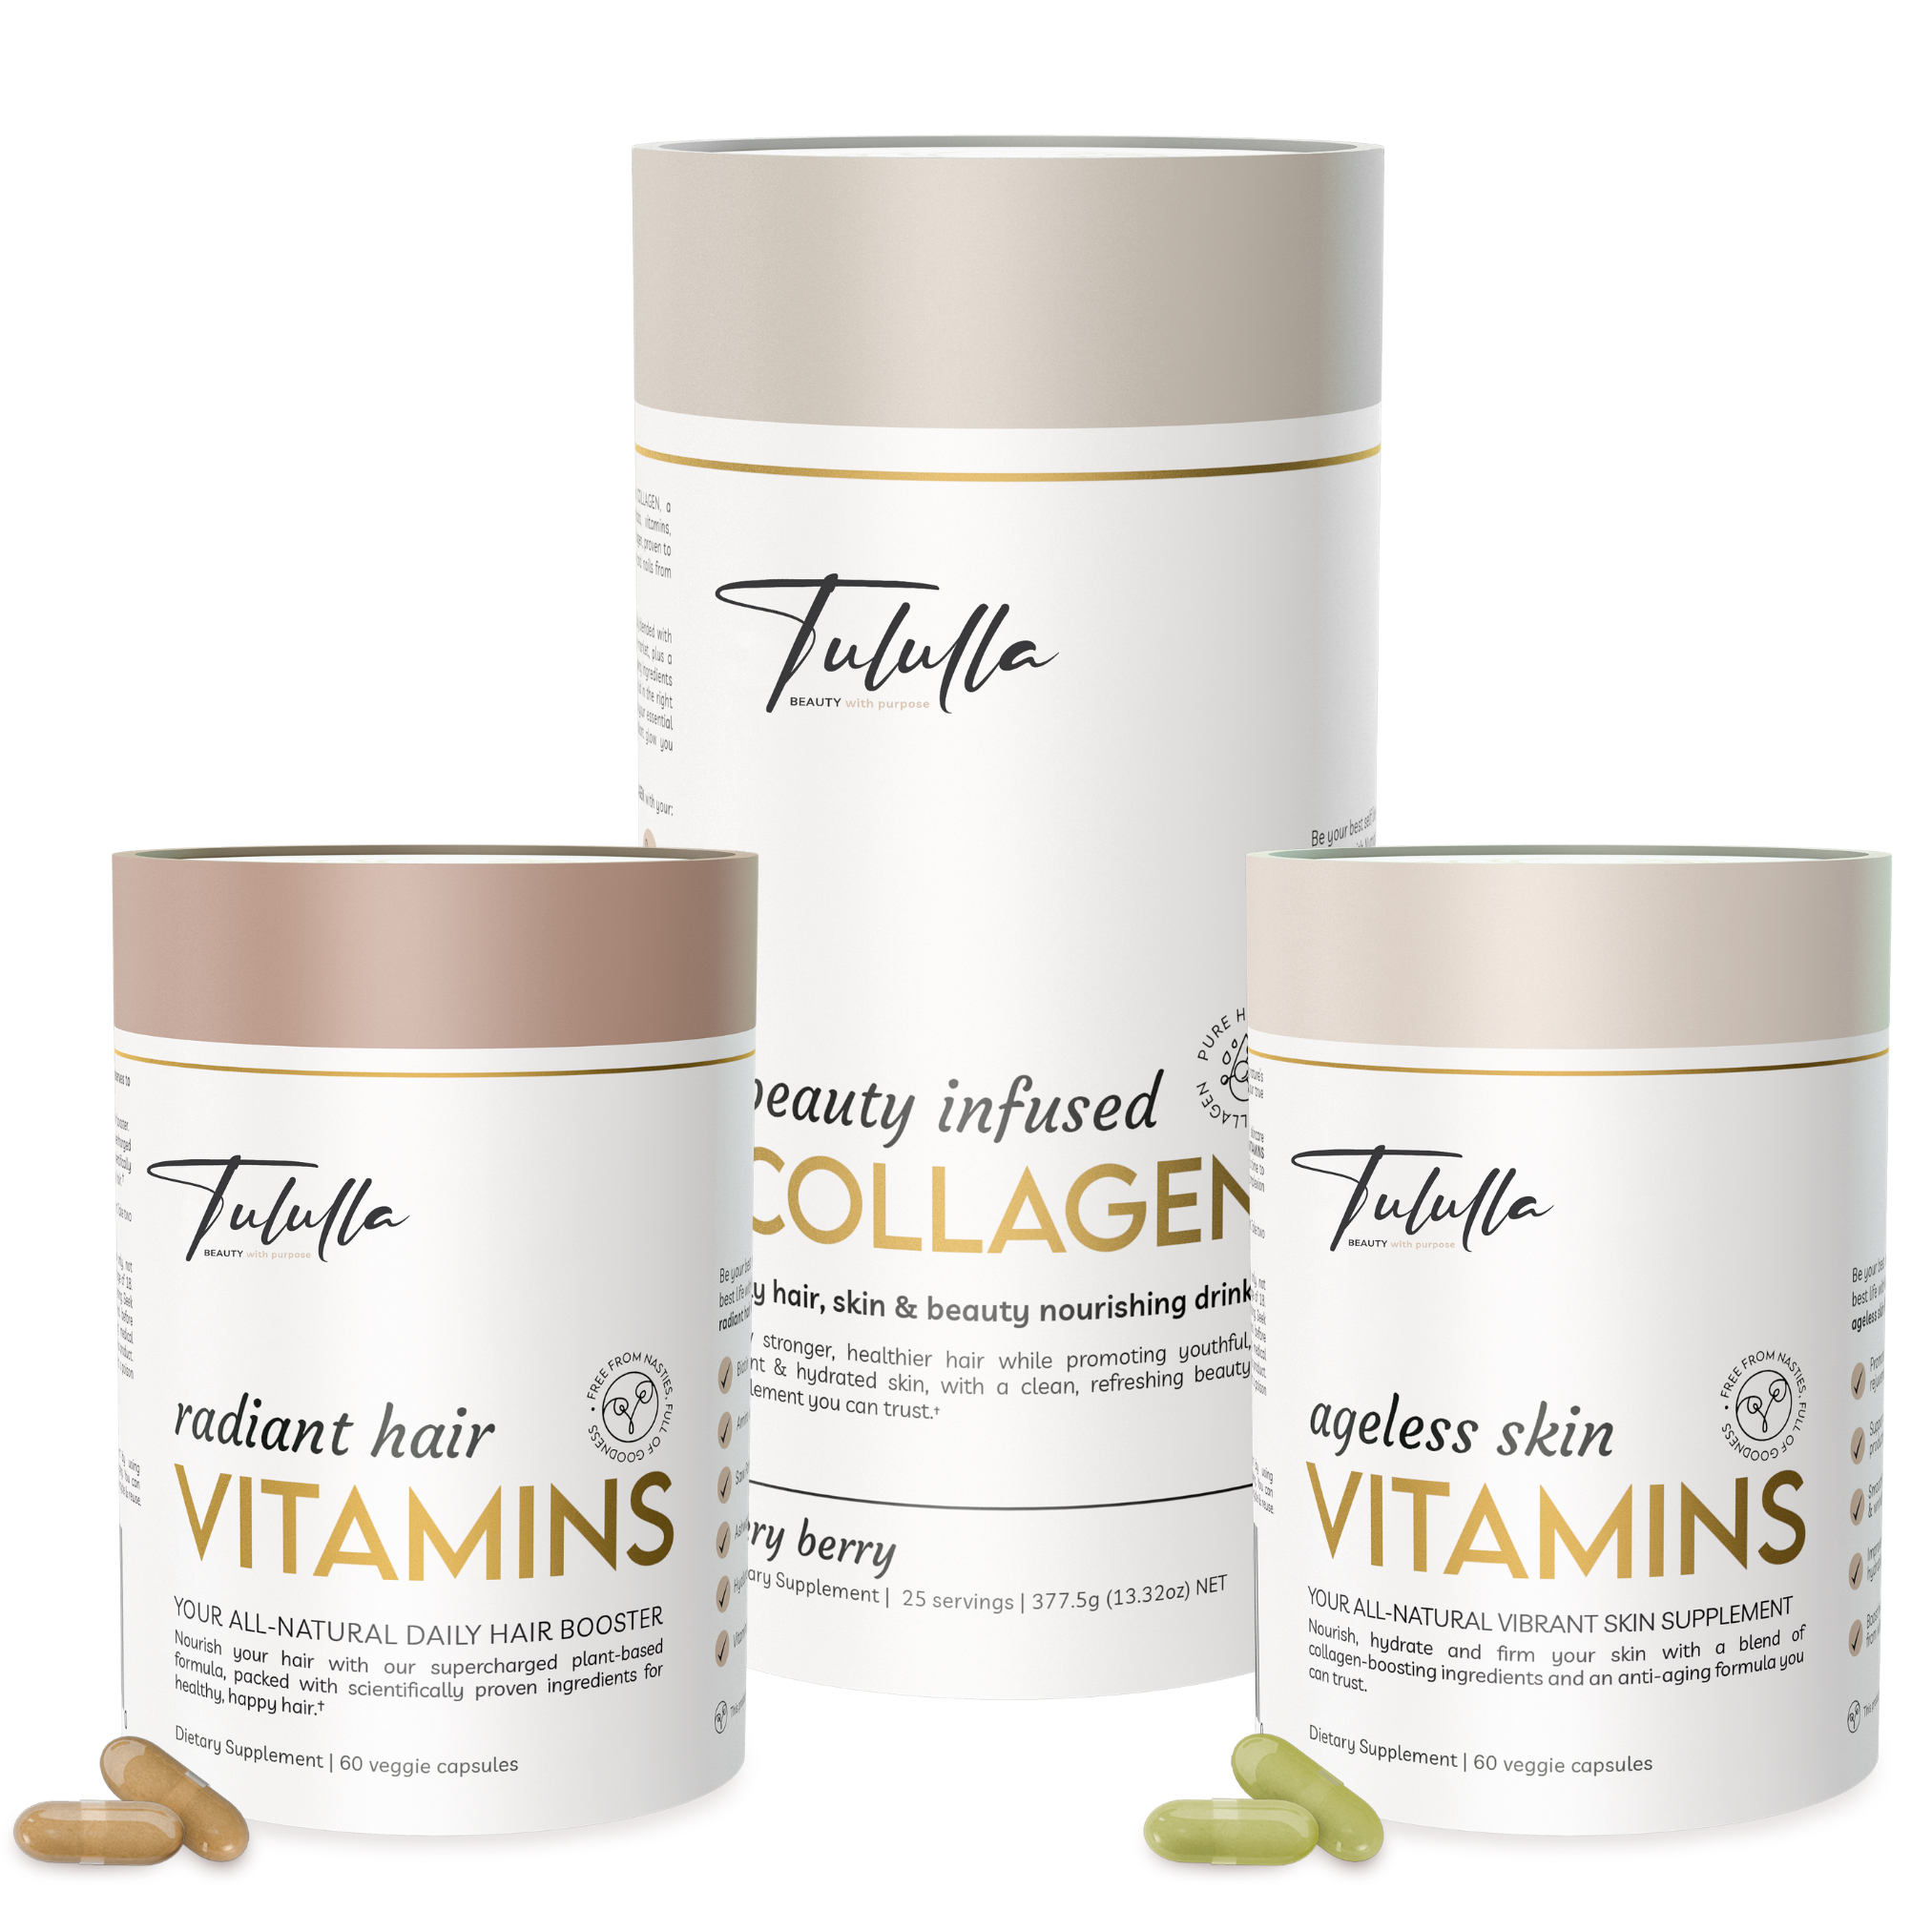 Tululla Beauty Bundle, Agless skin vitamins, Radiant Hair Vitamins, Beauty infused collagen.